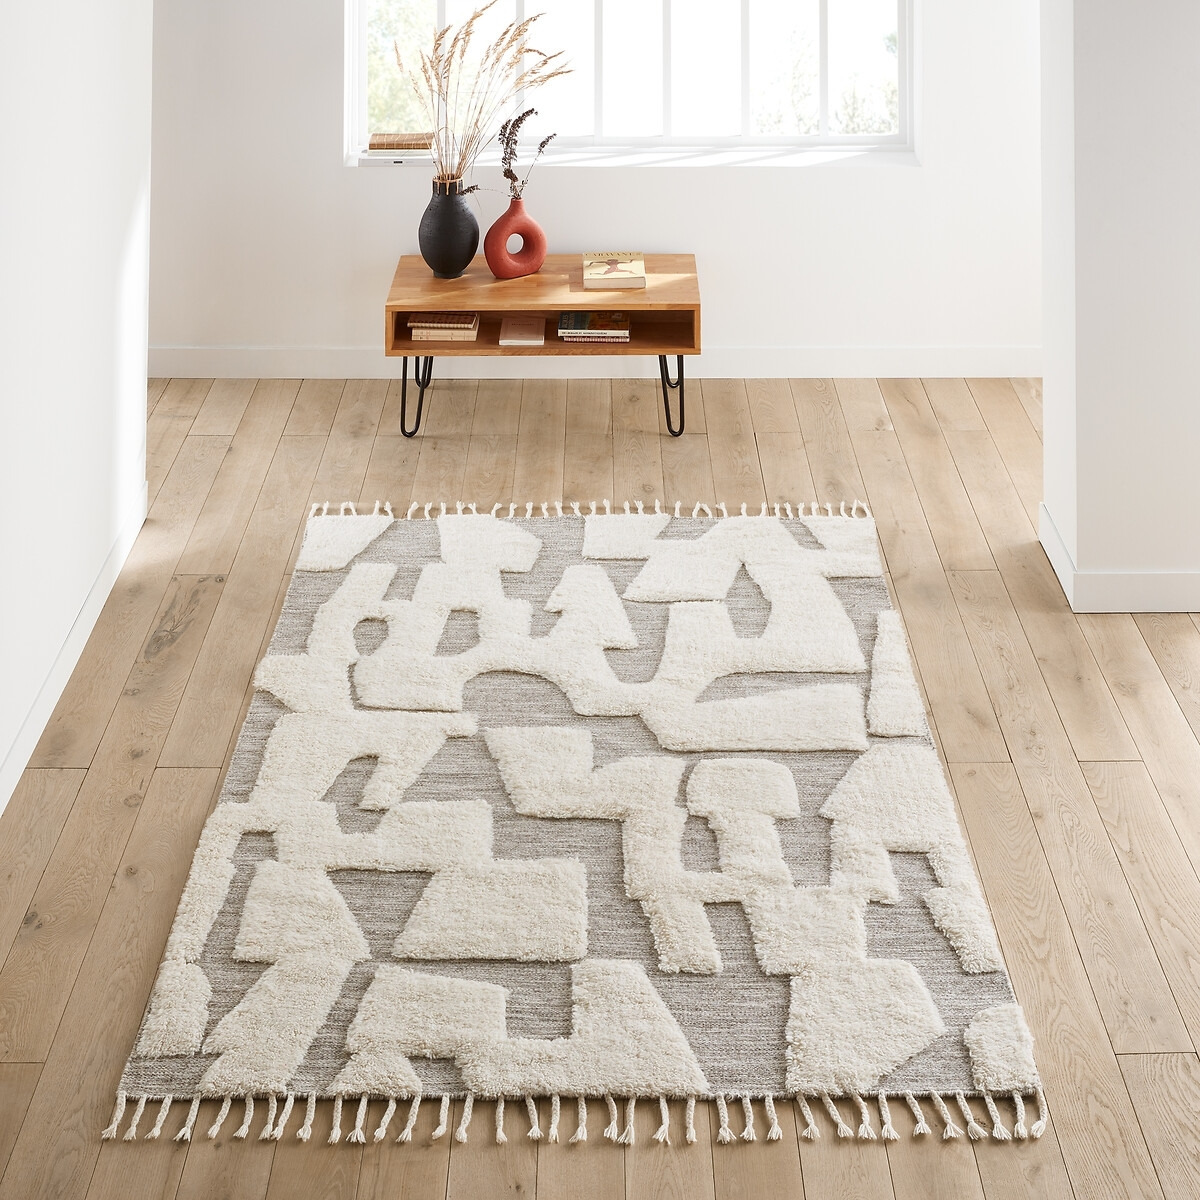 Launity Graphic Fringed Wool and Cotton Rug - image 1